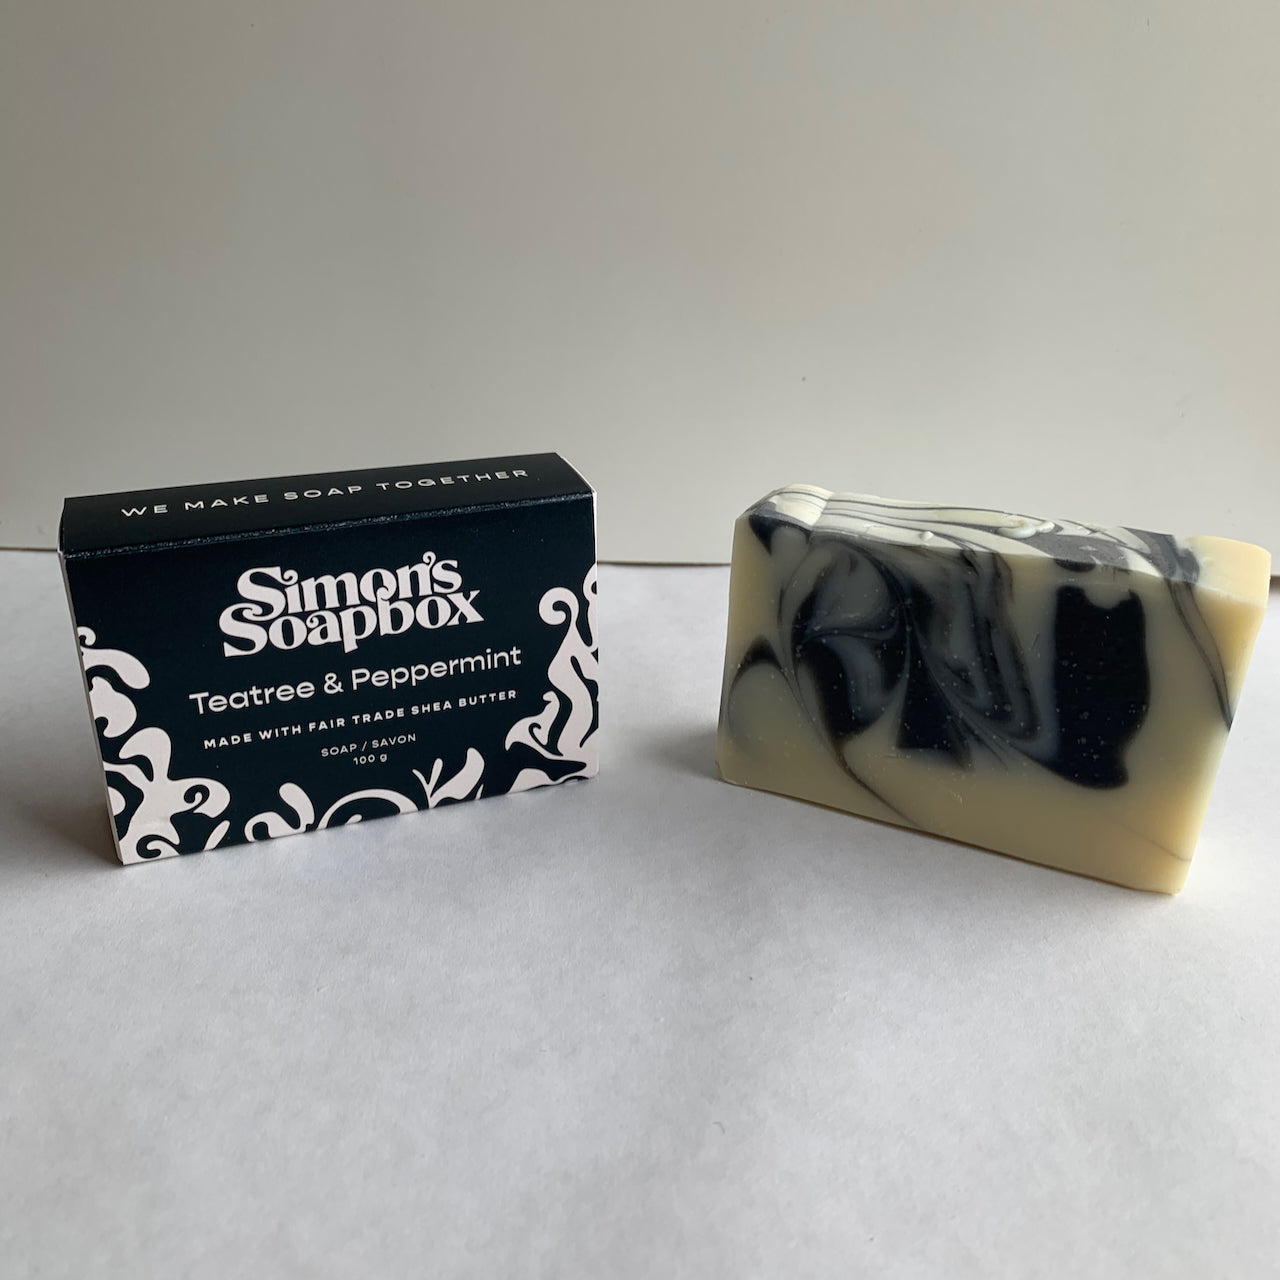 two bars of soap, one in a black and white package and one unwrapped with a black and grey swirl